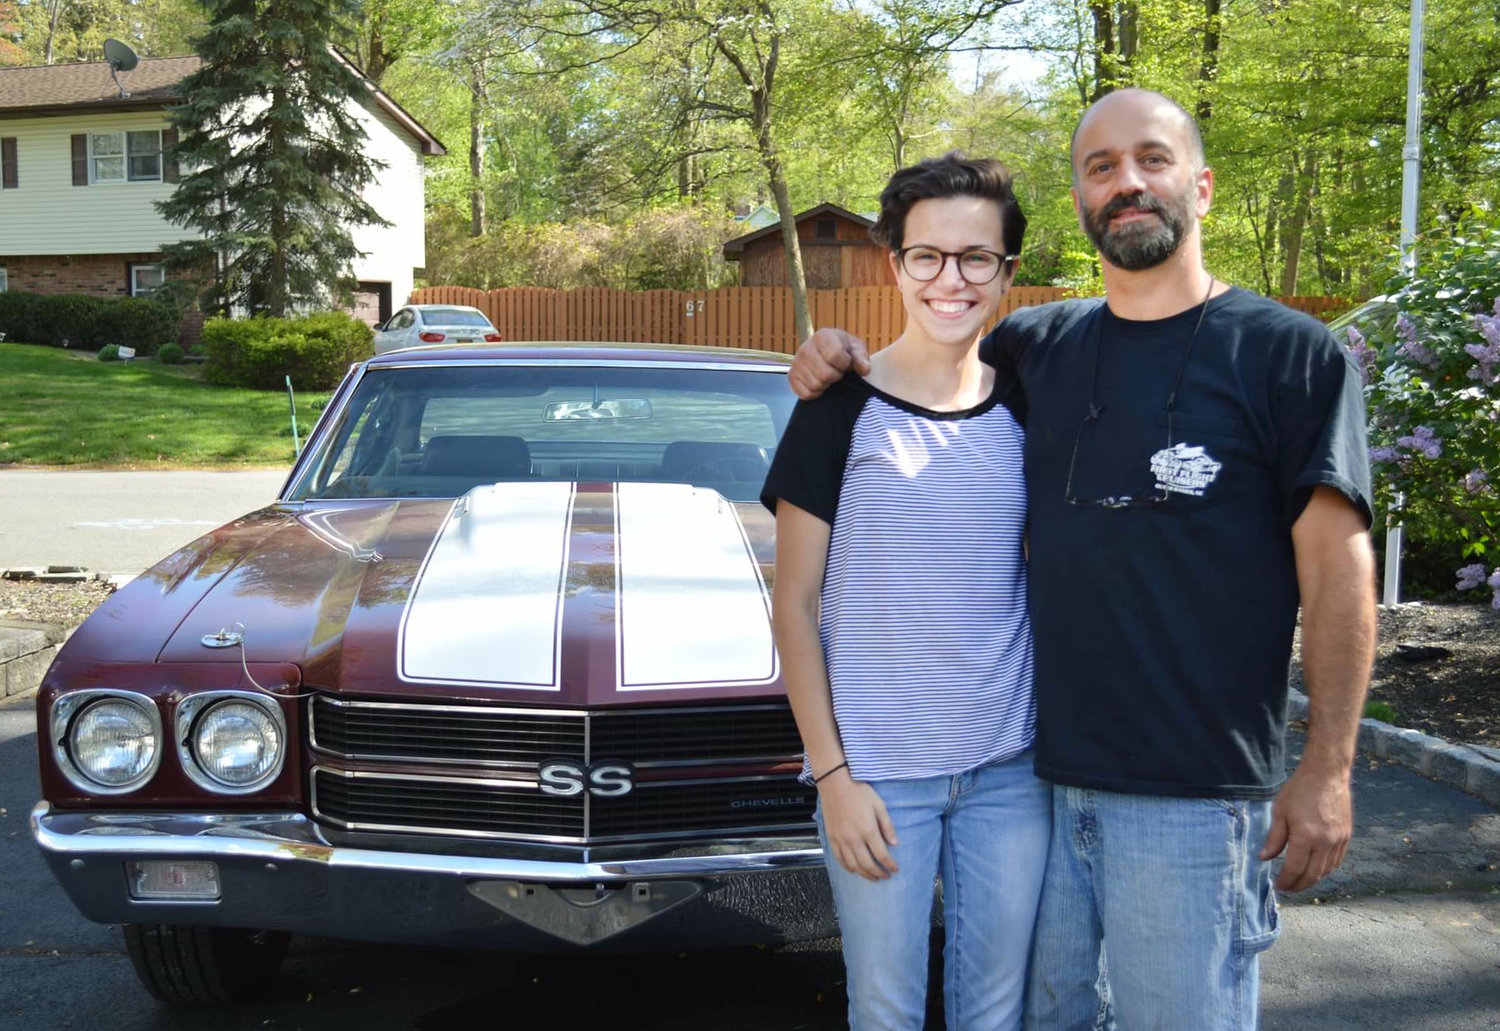 Car enthusiasts Frank Fiori and his daughter Francesca with a custom restored 1970 SS Chevy Chevelle. The Knights of Columbus Council 12571 is sponsoring a Car Motorcycle and Truck Show to benefit their Food For Families and Friends Meals Program. The Show will be held on  June 25th from 10-3pm at St John Neimann Church.